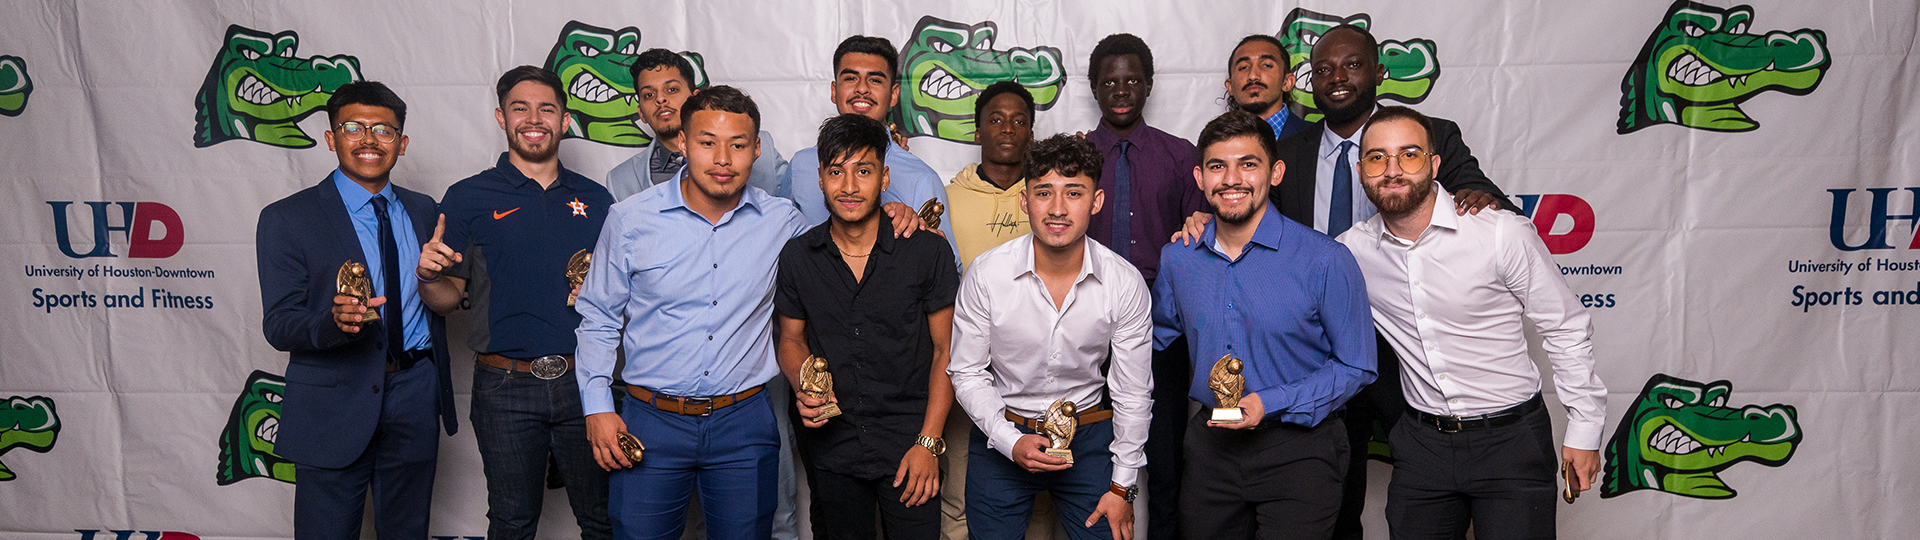 Group shot of students with awards.